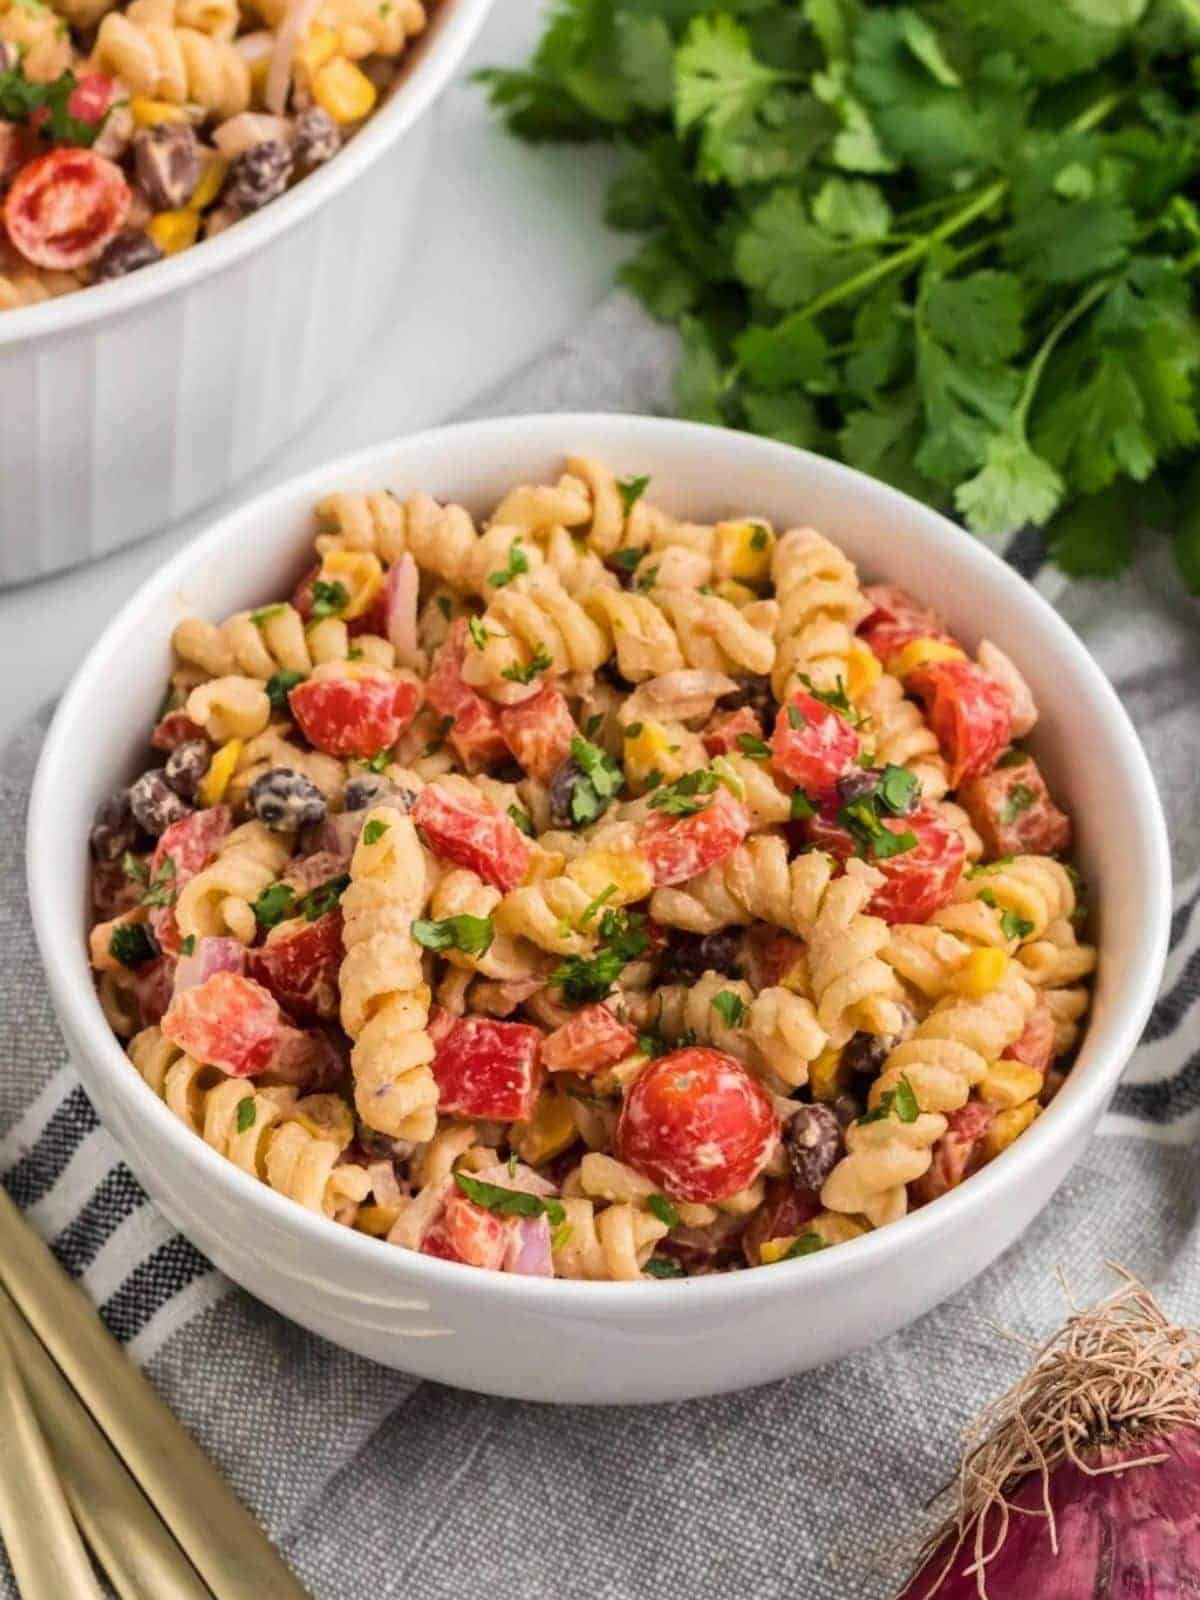 Southwest pasta salad in a white bowl on top of grey striped napkin